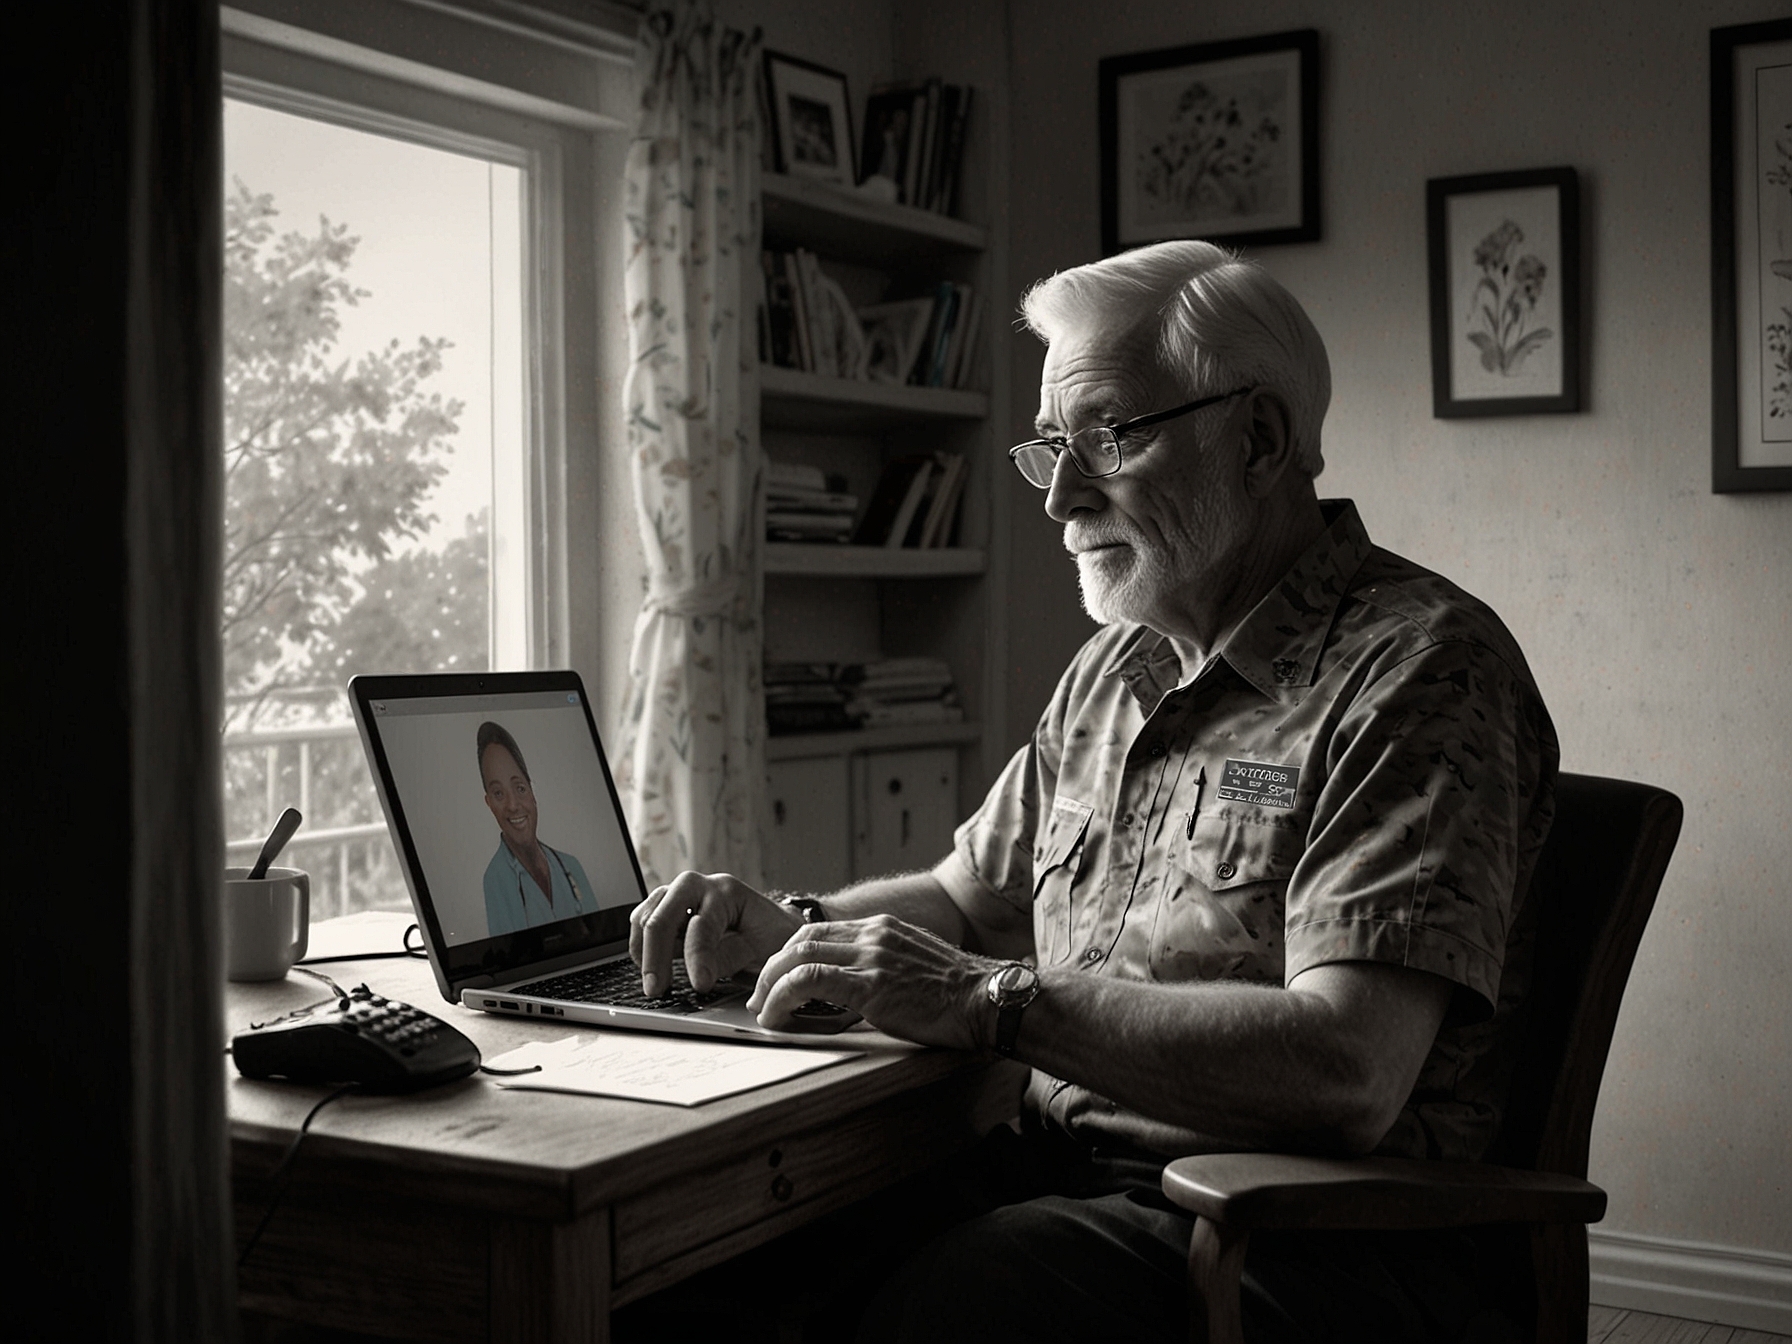 An illustration of a veteran accessing a telehealth consultation from home, showcasing the convenience and accessibility of healthcare services regardless of geographical location.